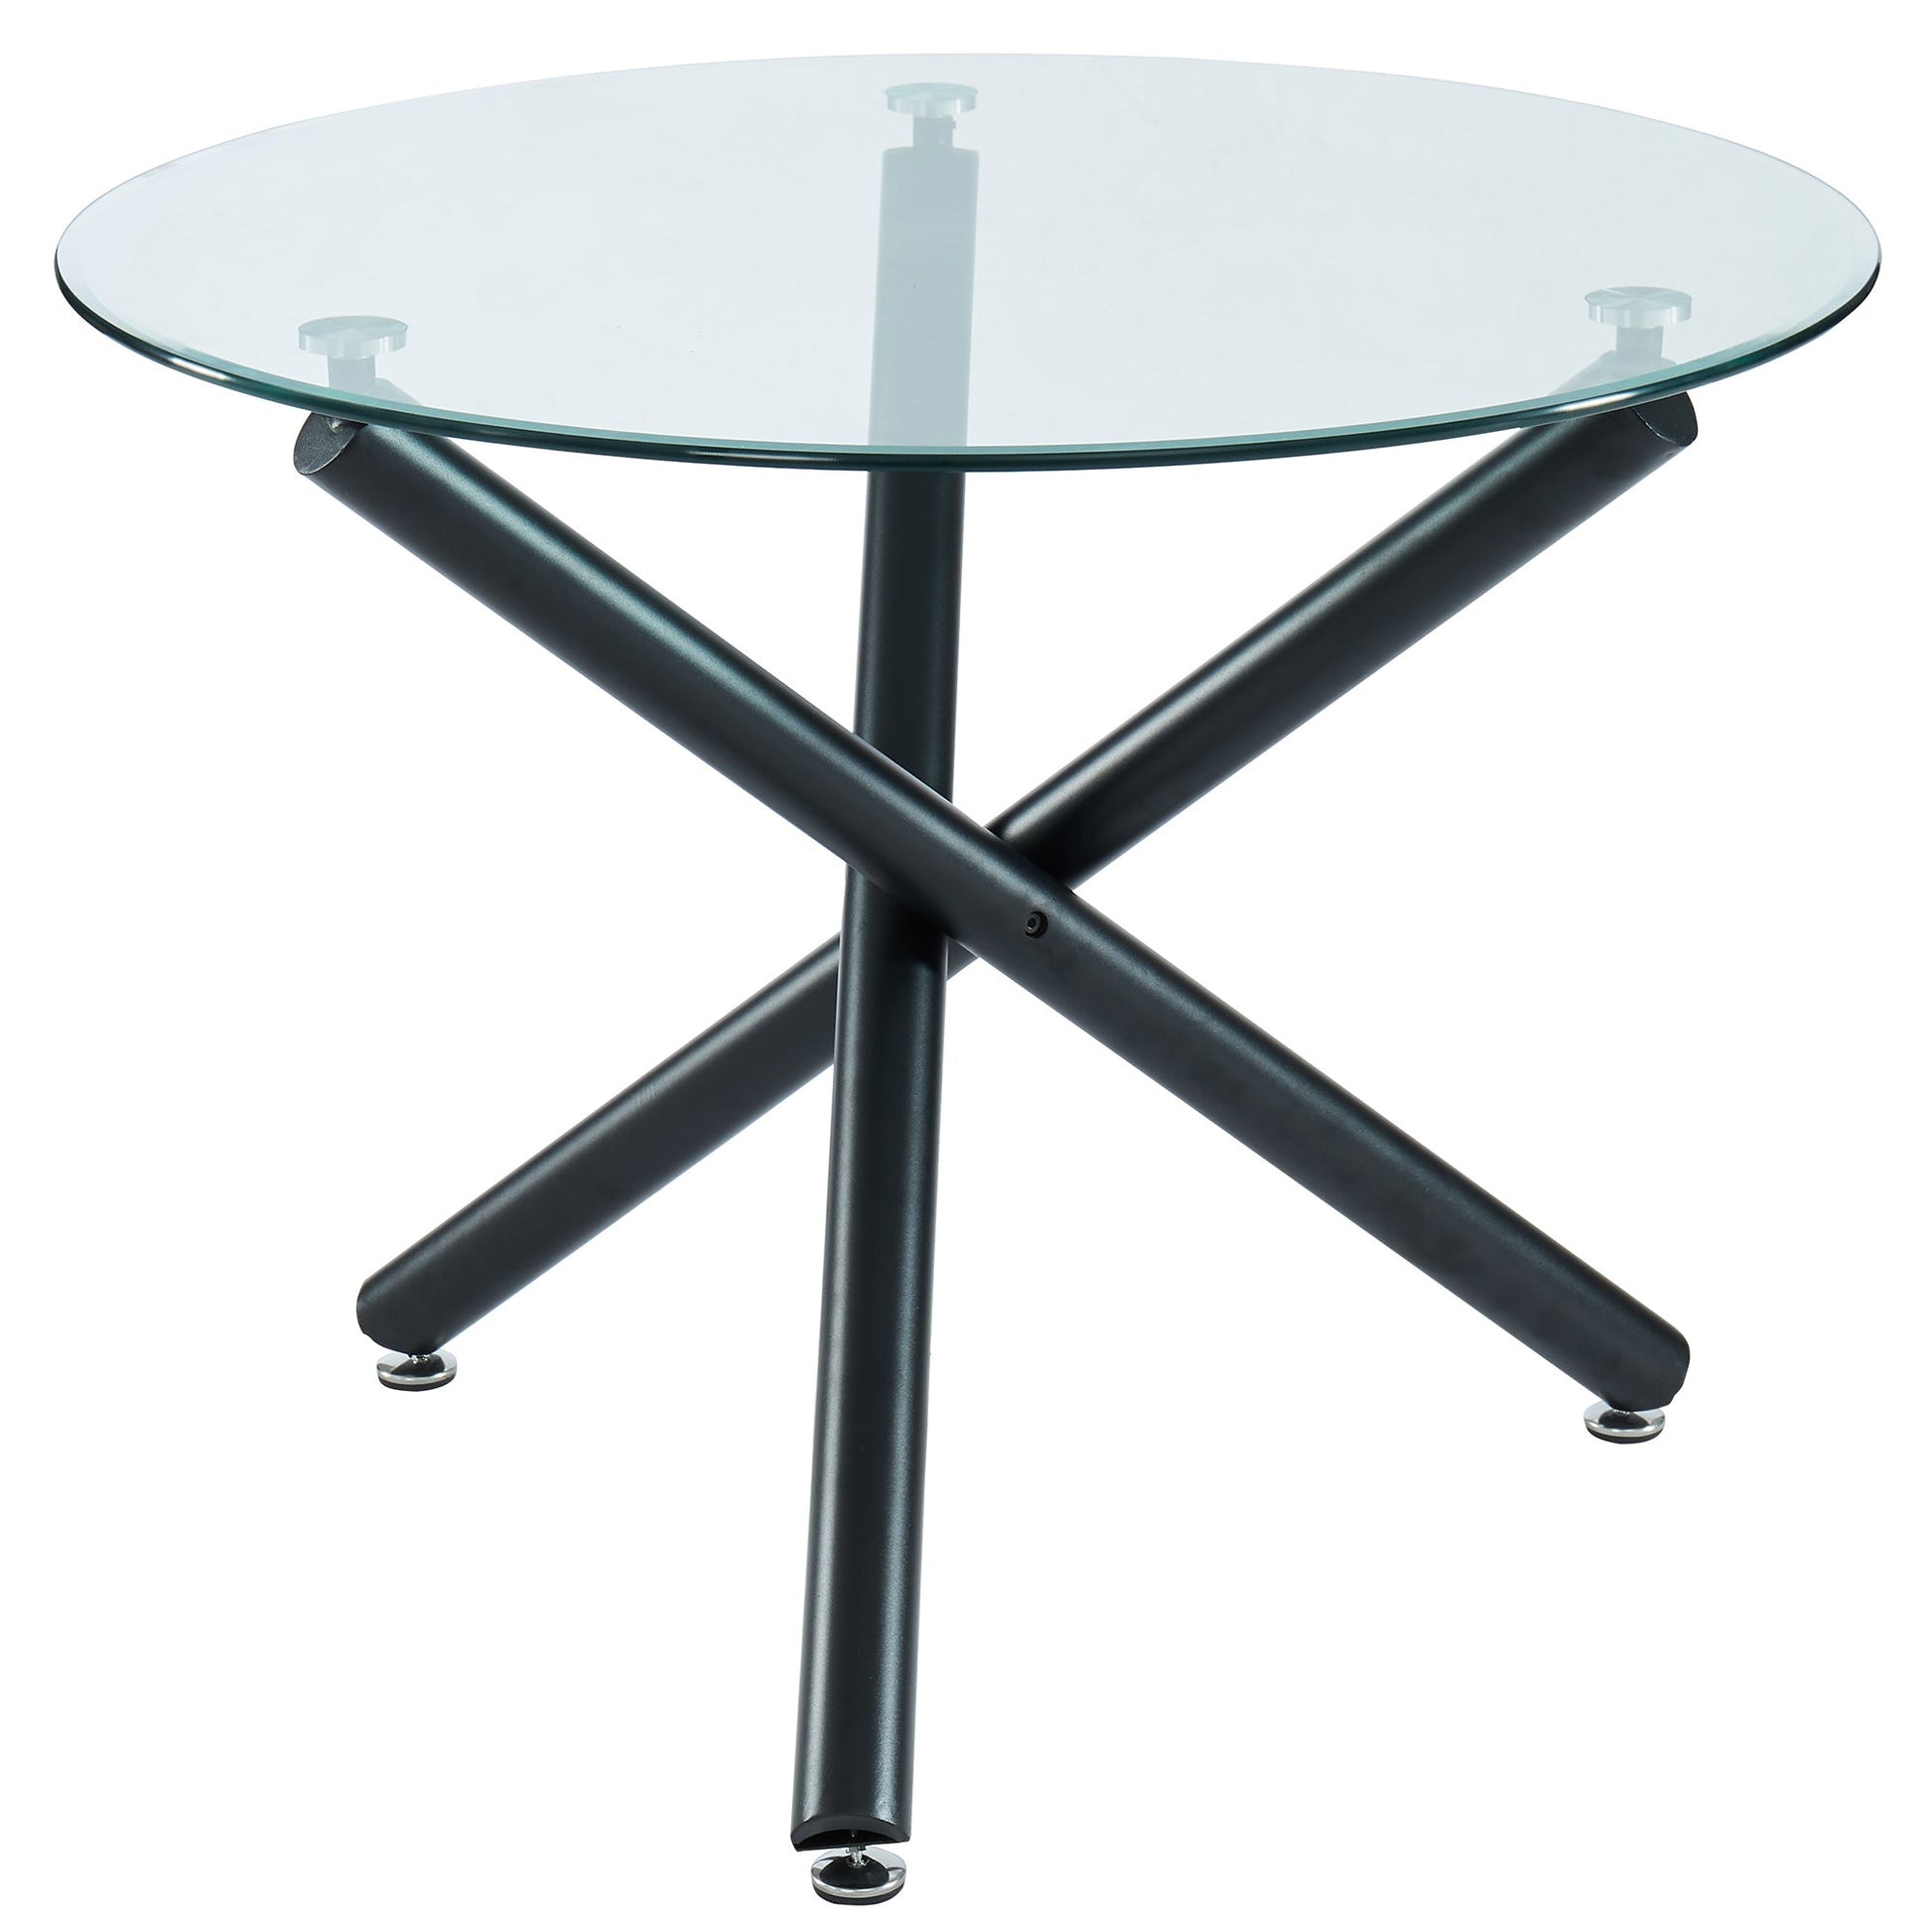 Round Glass Dining Table Rocca Black - Your Bar Stools Canada